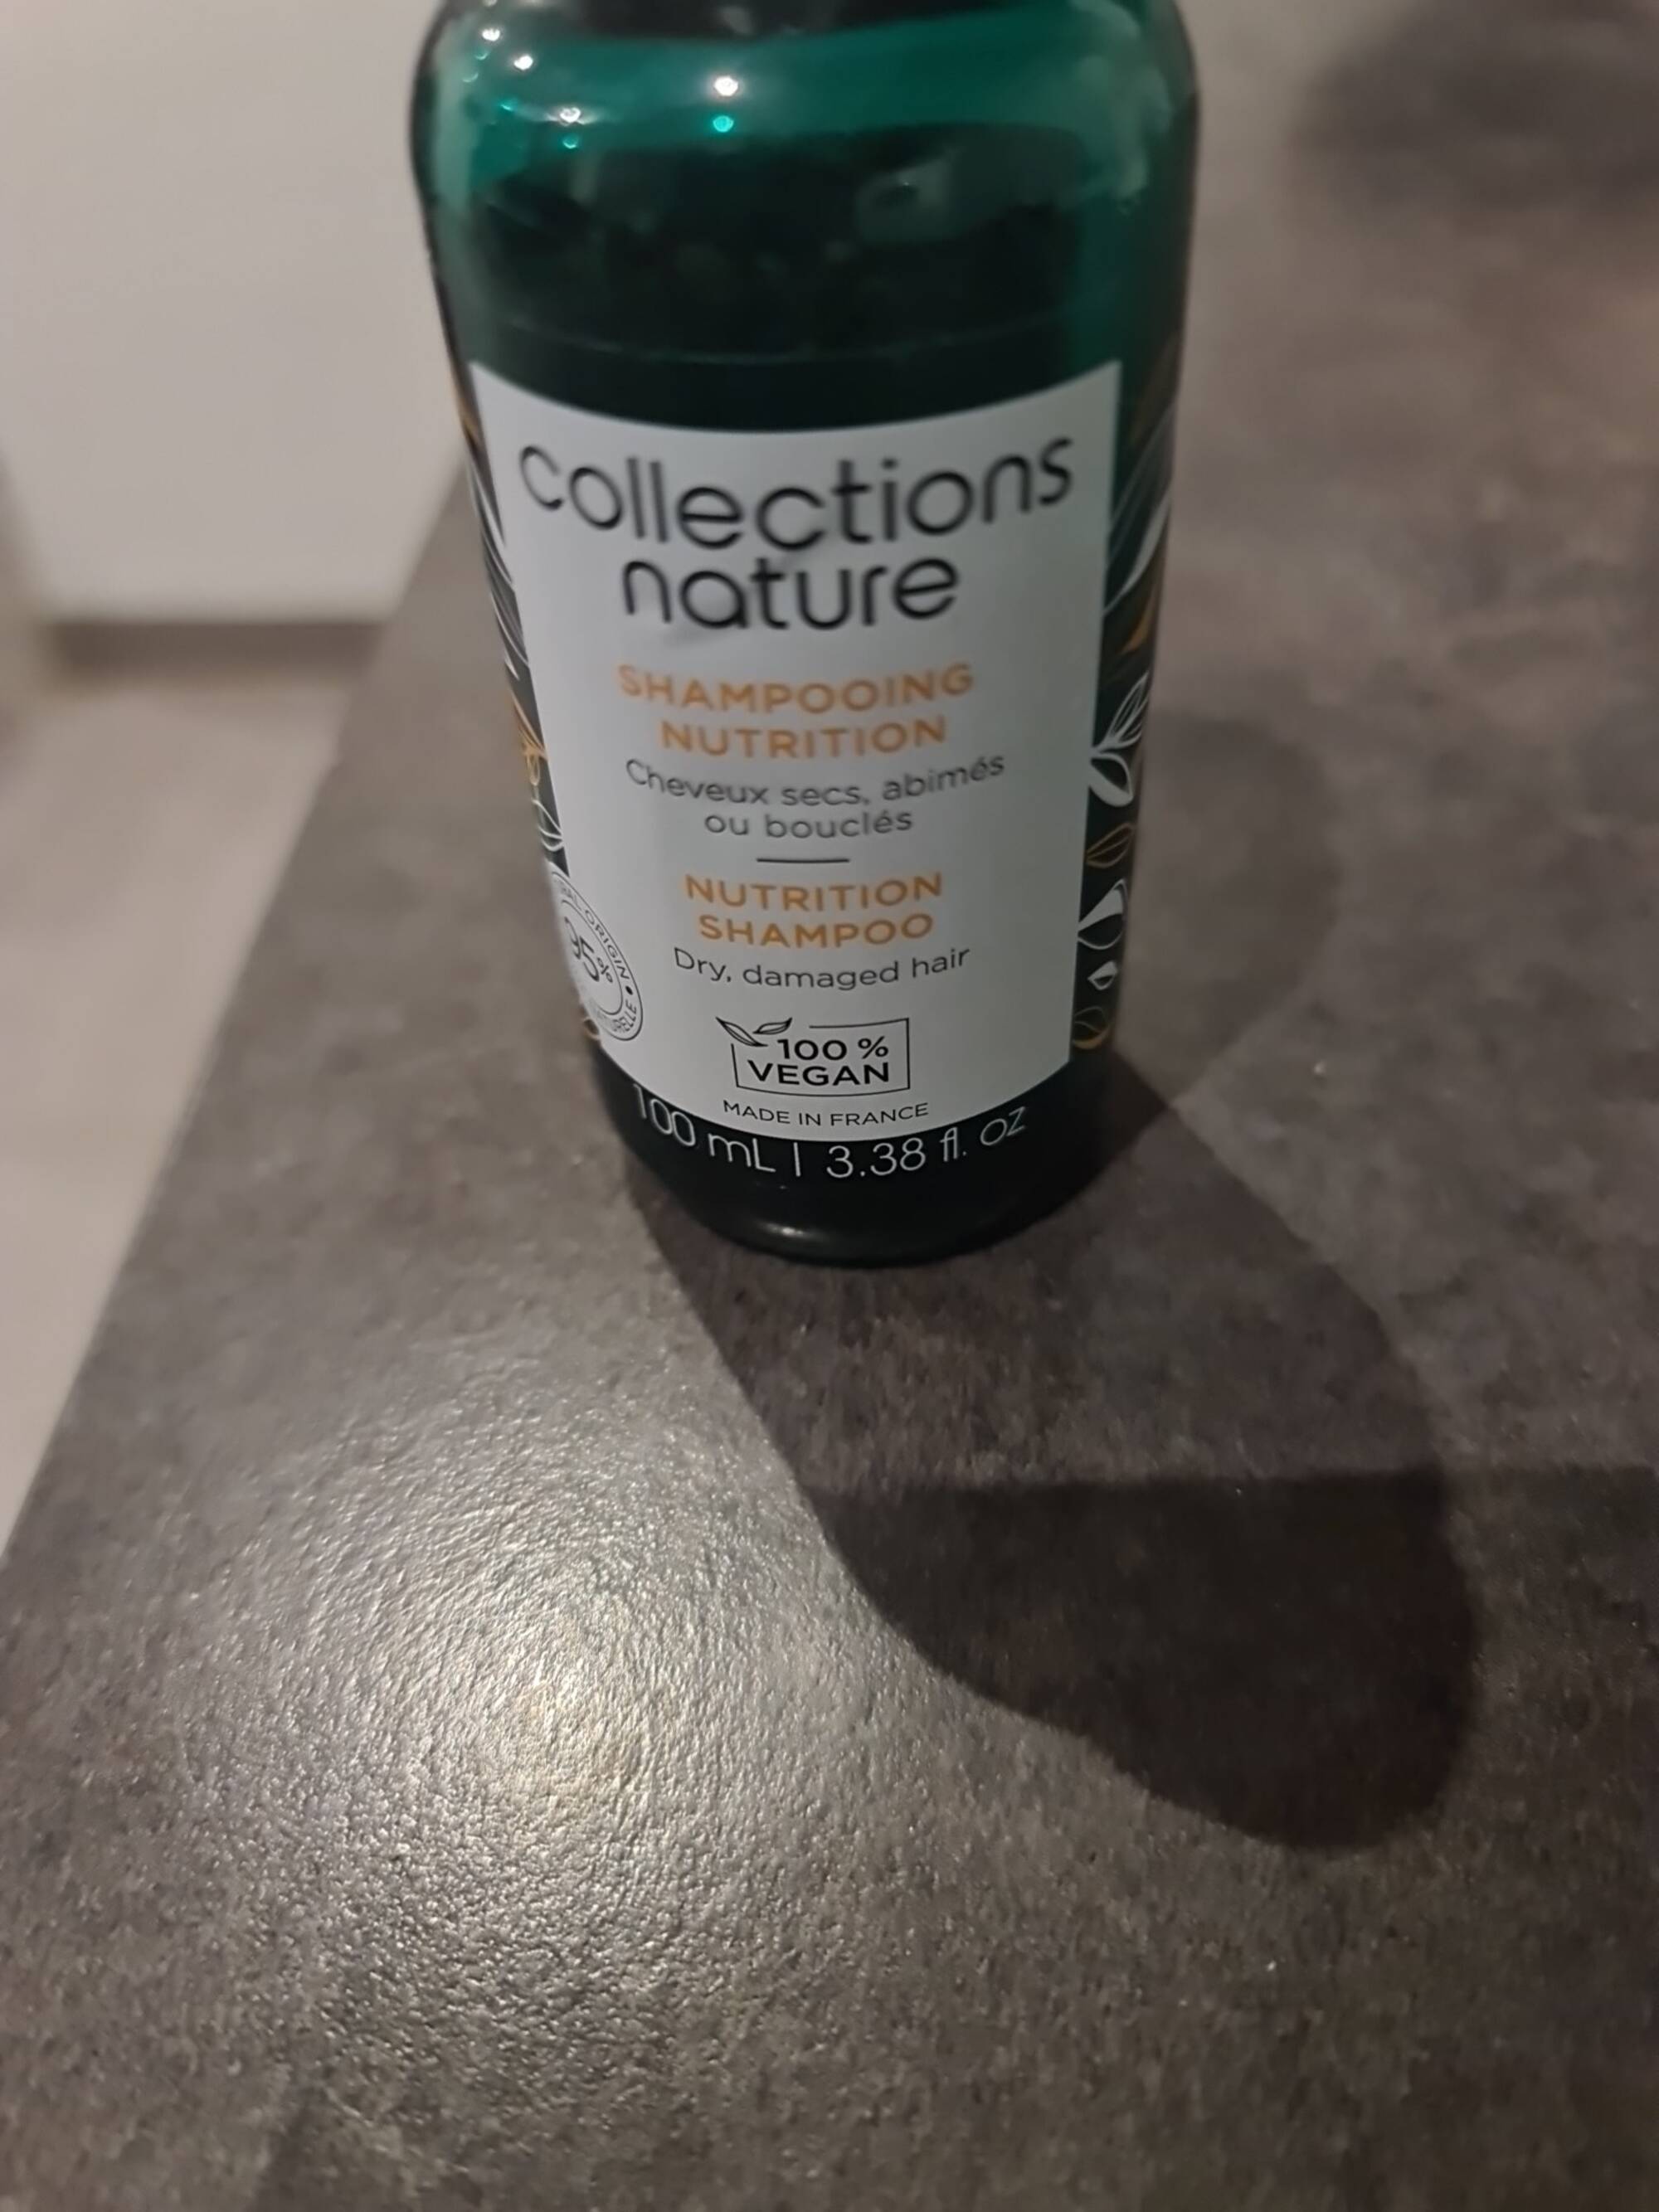 COLLECTIONS NATURE - Shampooing nutrition